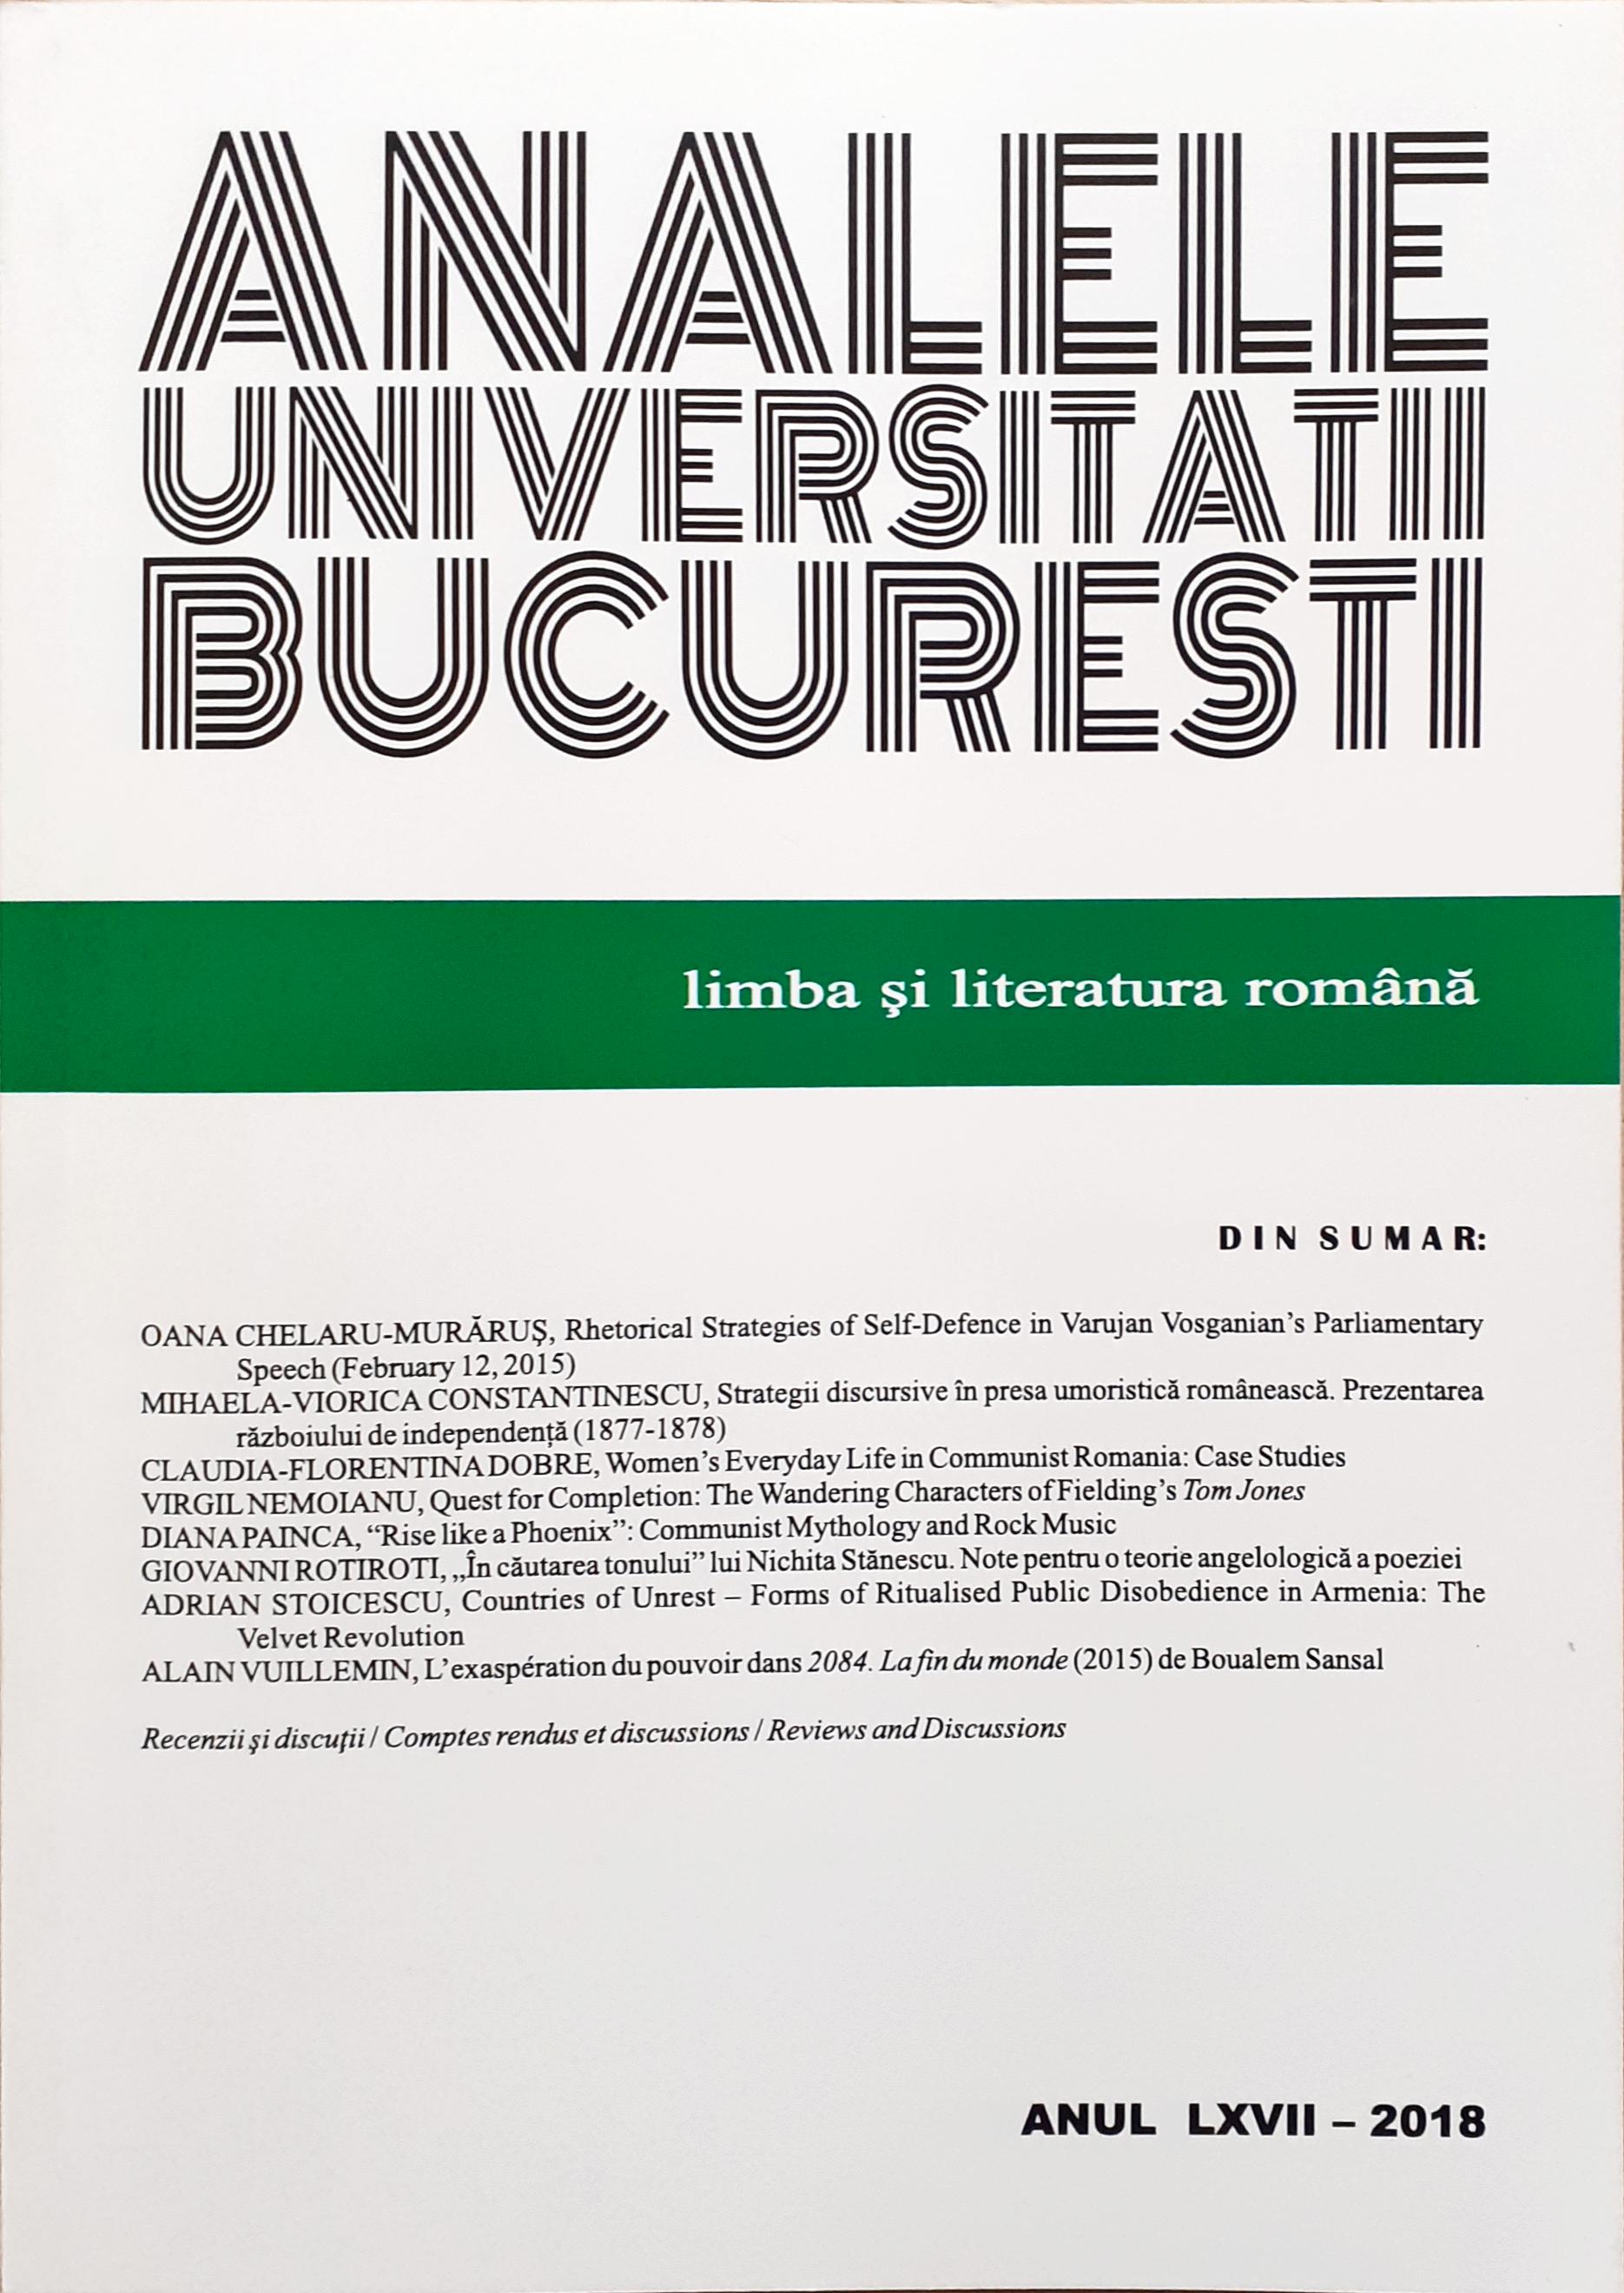 Countries of Unrest – Forms of Ritualised Public Disobedience in Armenia: The Velvet Revolution Cover Image